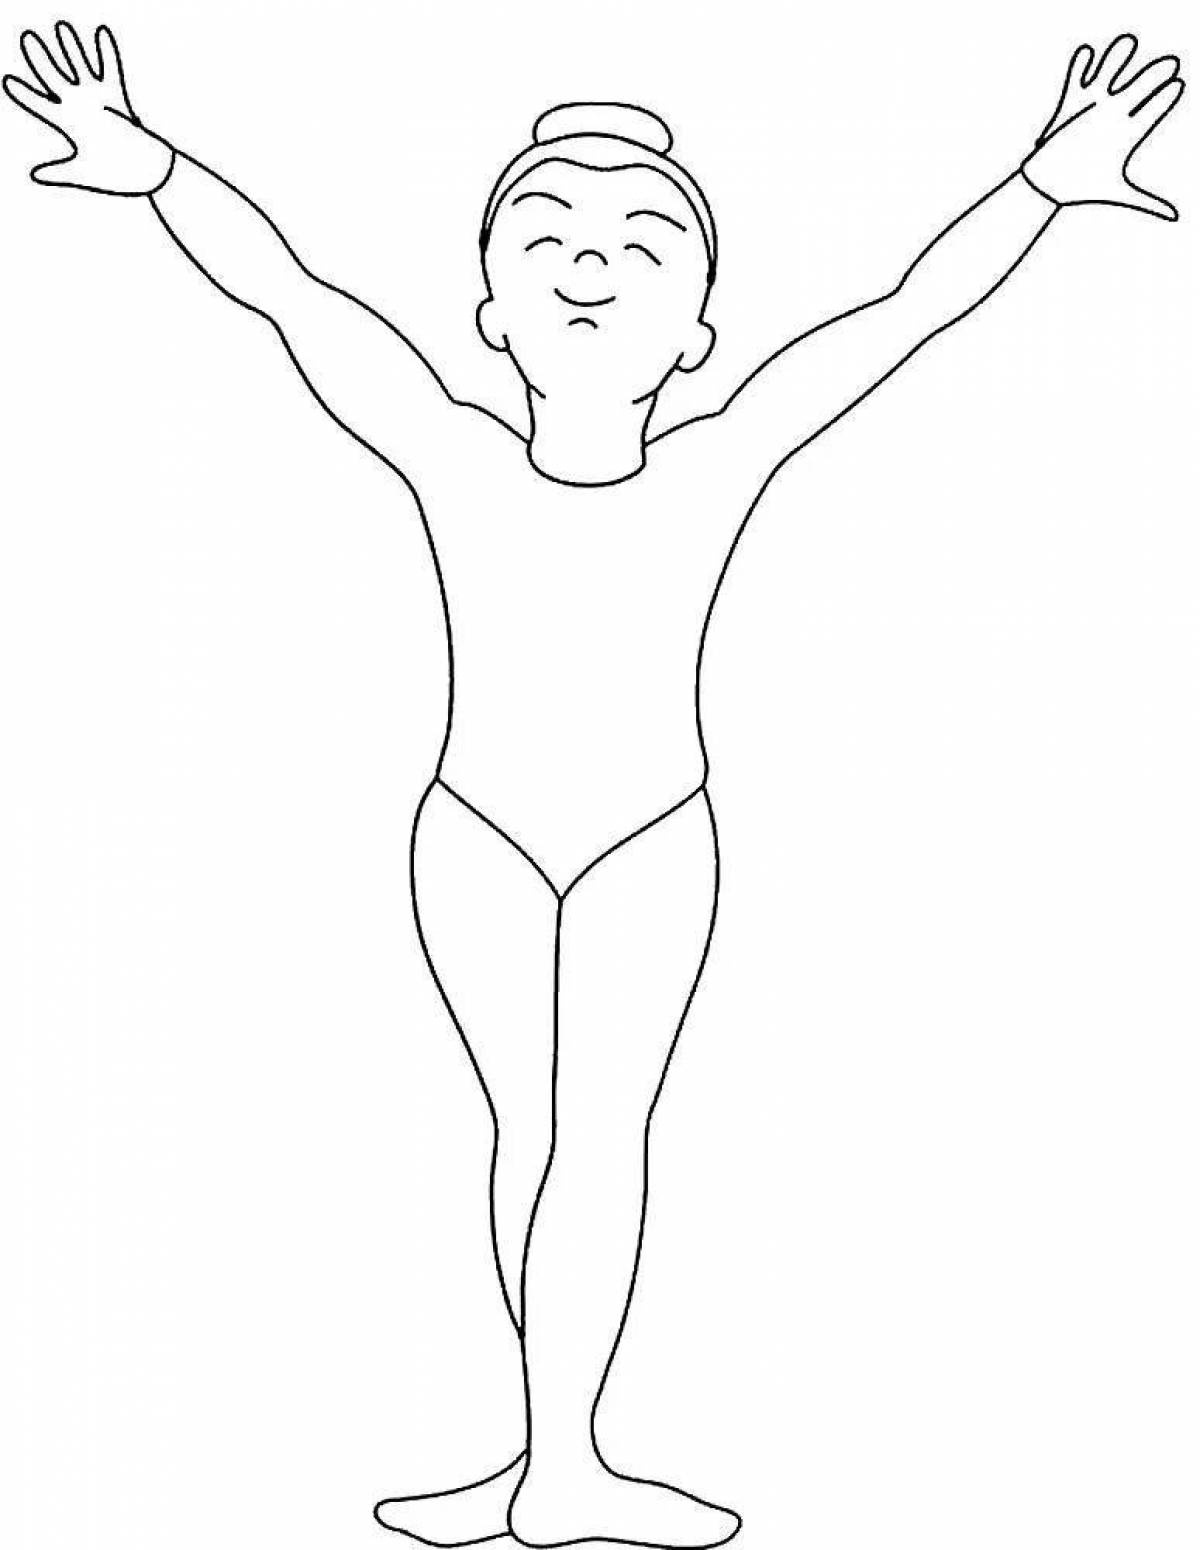 Spicy gymnastics coloring book for kids